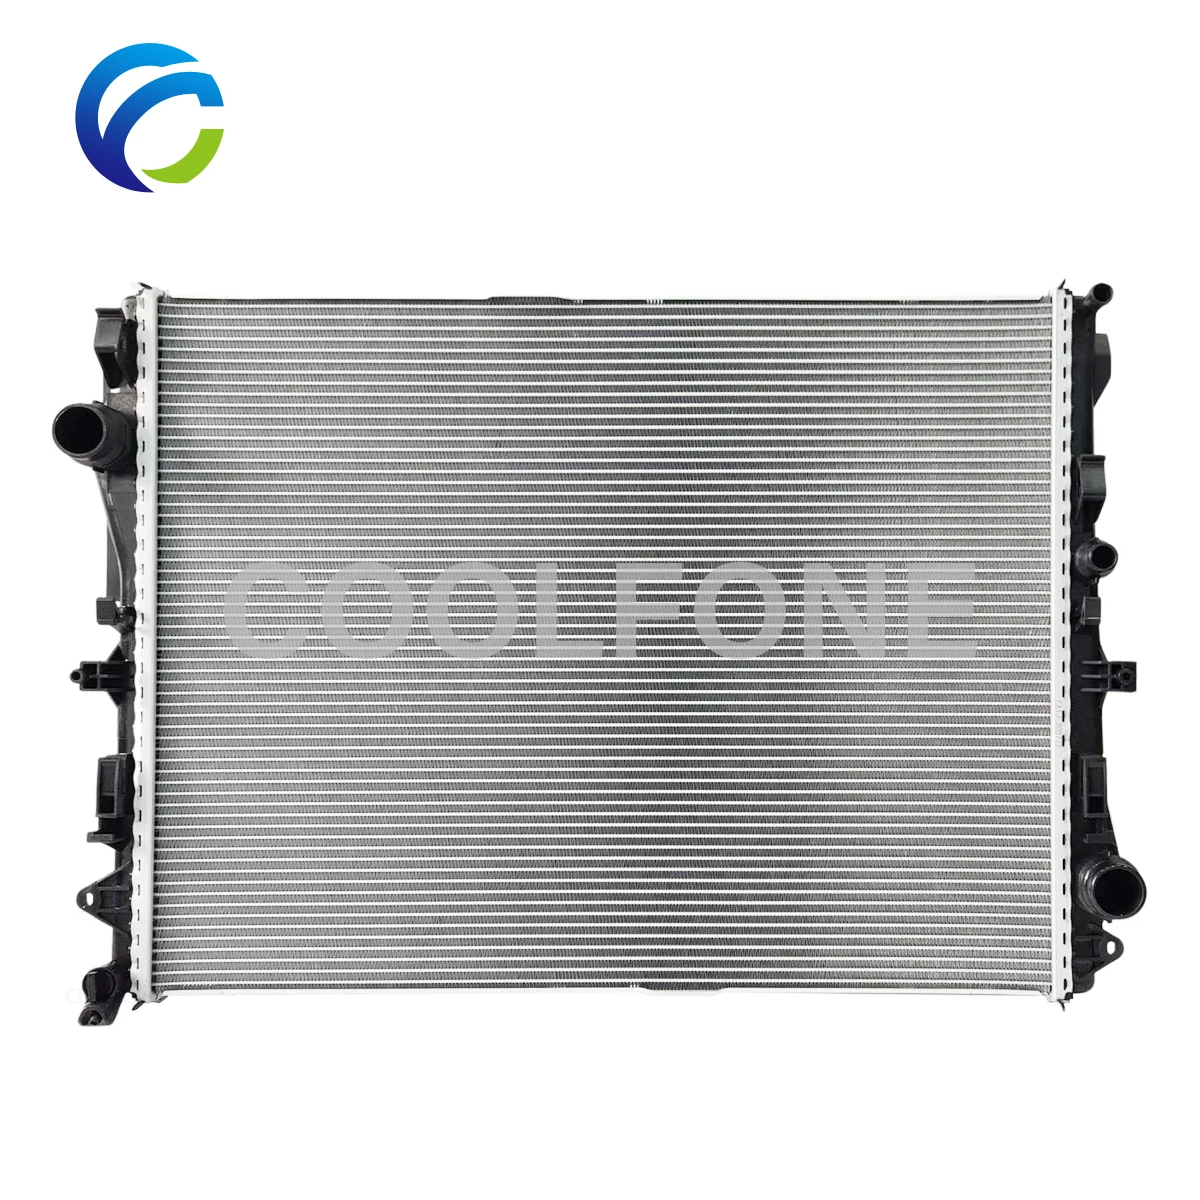 

Engine Cooling Radiator for MERCEDES BENZ W222 X222 C217 S300 S350 S400 S500 S600 S63 W257 CLS 2016- A0995005000